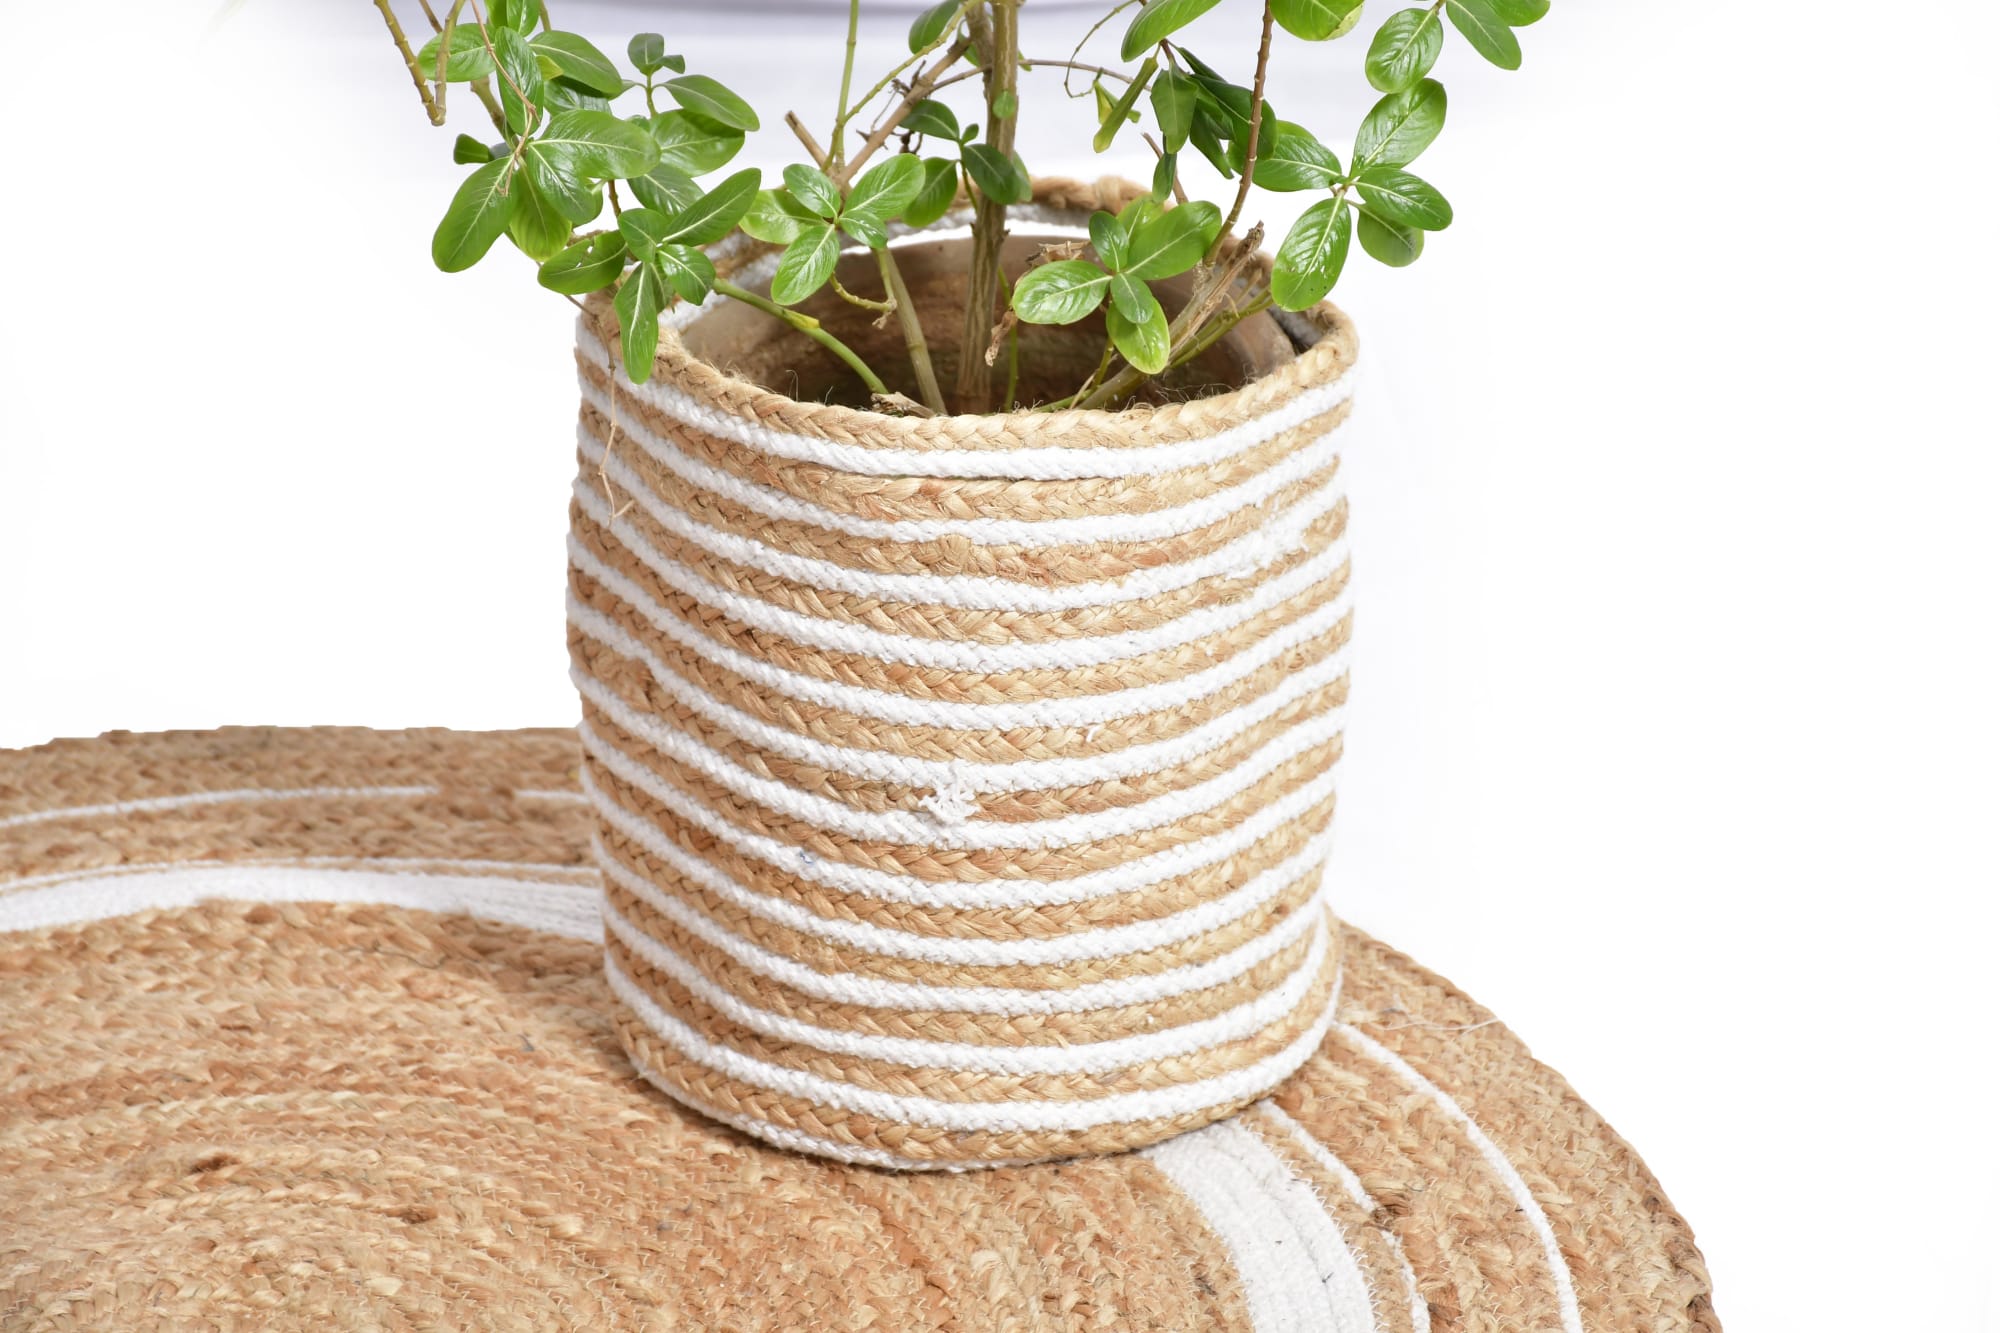 Handwoven Organic Jute Round Planters- Plant Pot (Set of 4) by